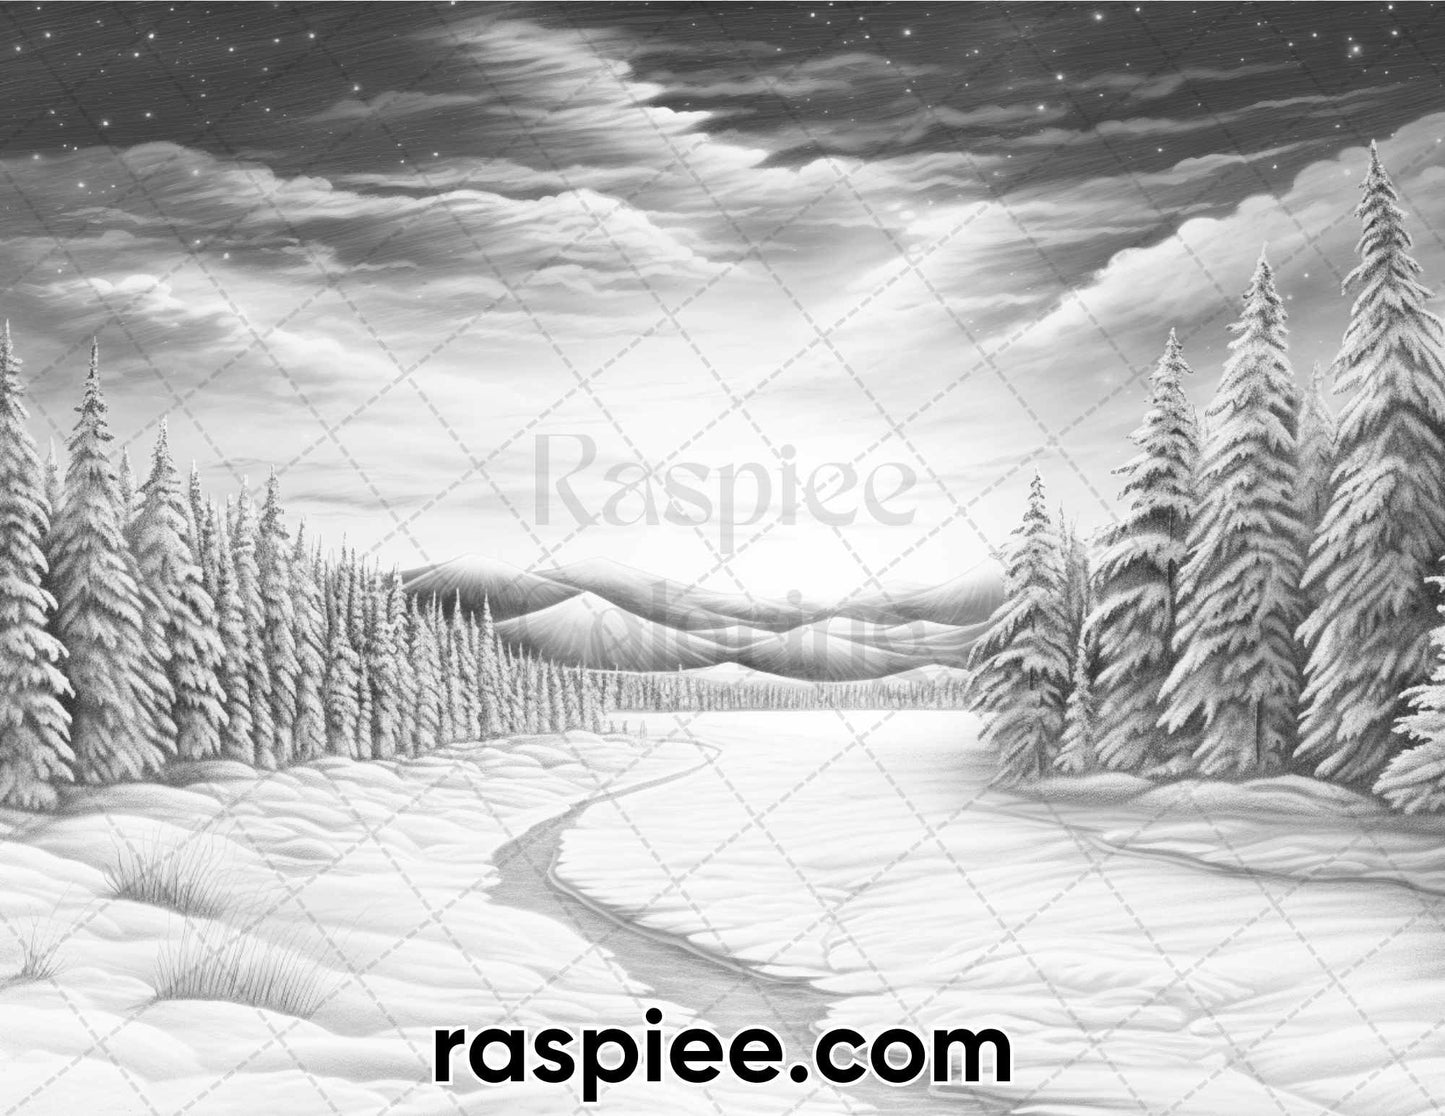 winter coloring pages for adults, landscapes coloring pages for adults, adult coloring pages, adults coloring sheets, adult coloring book printable